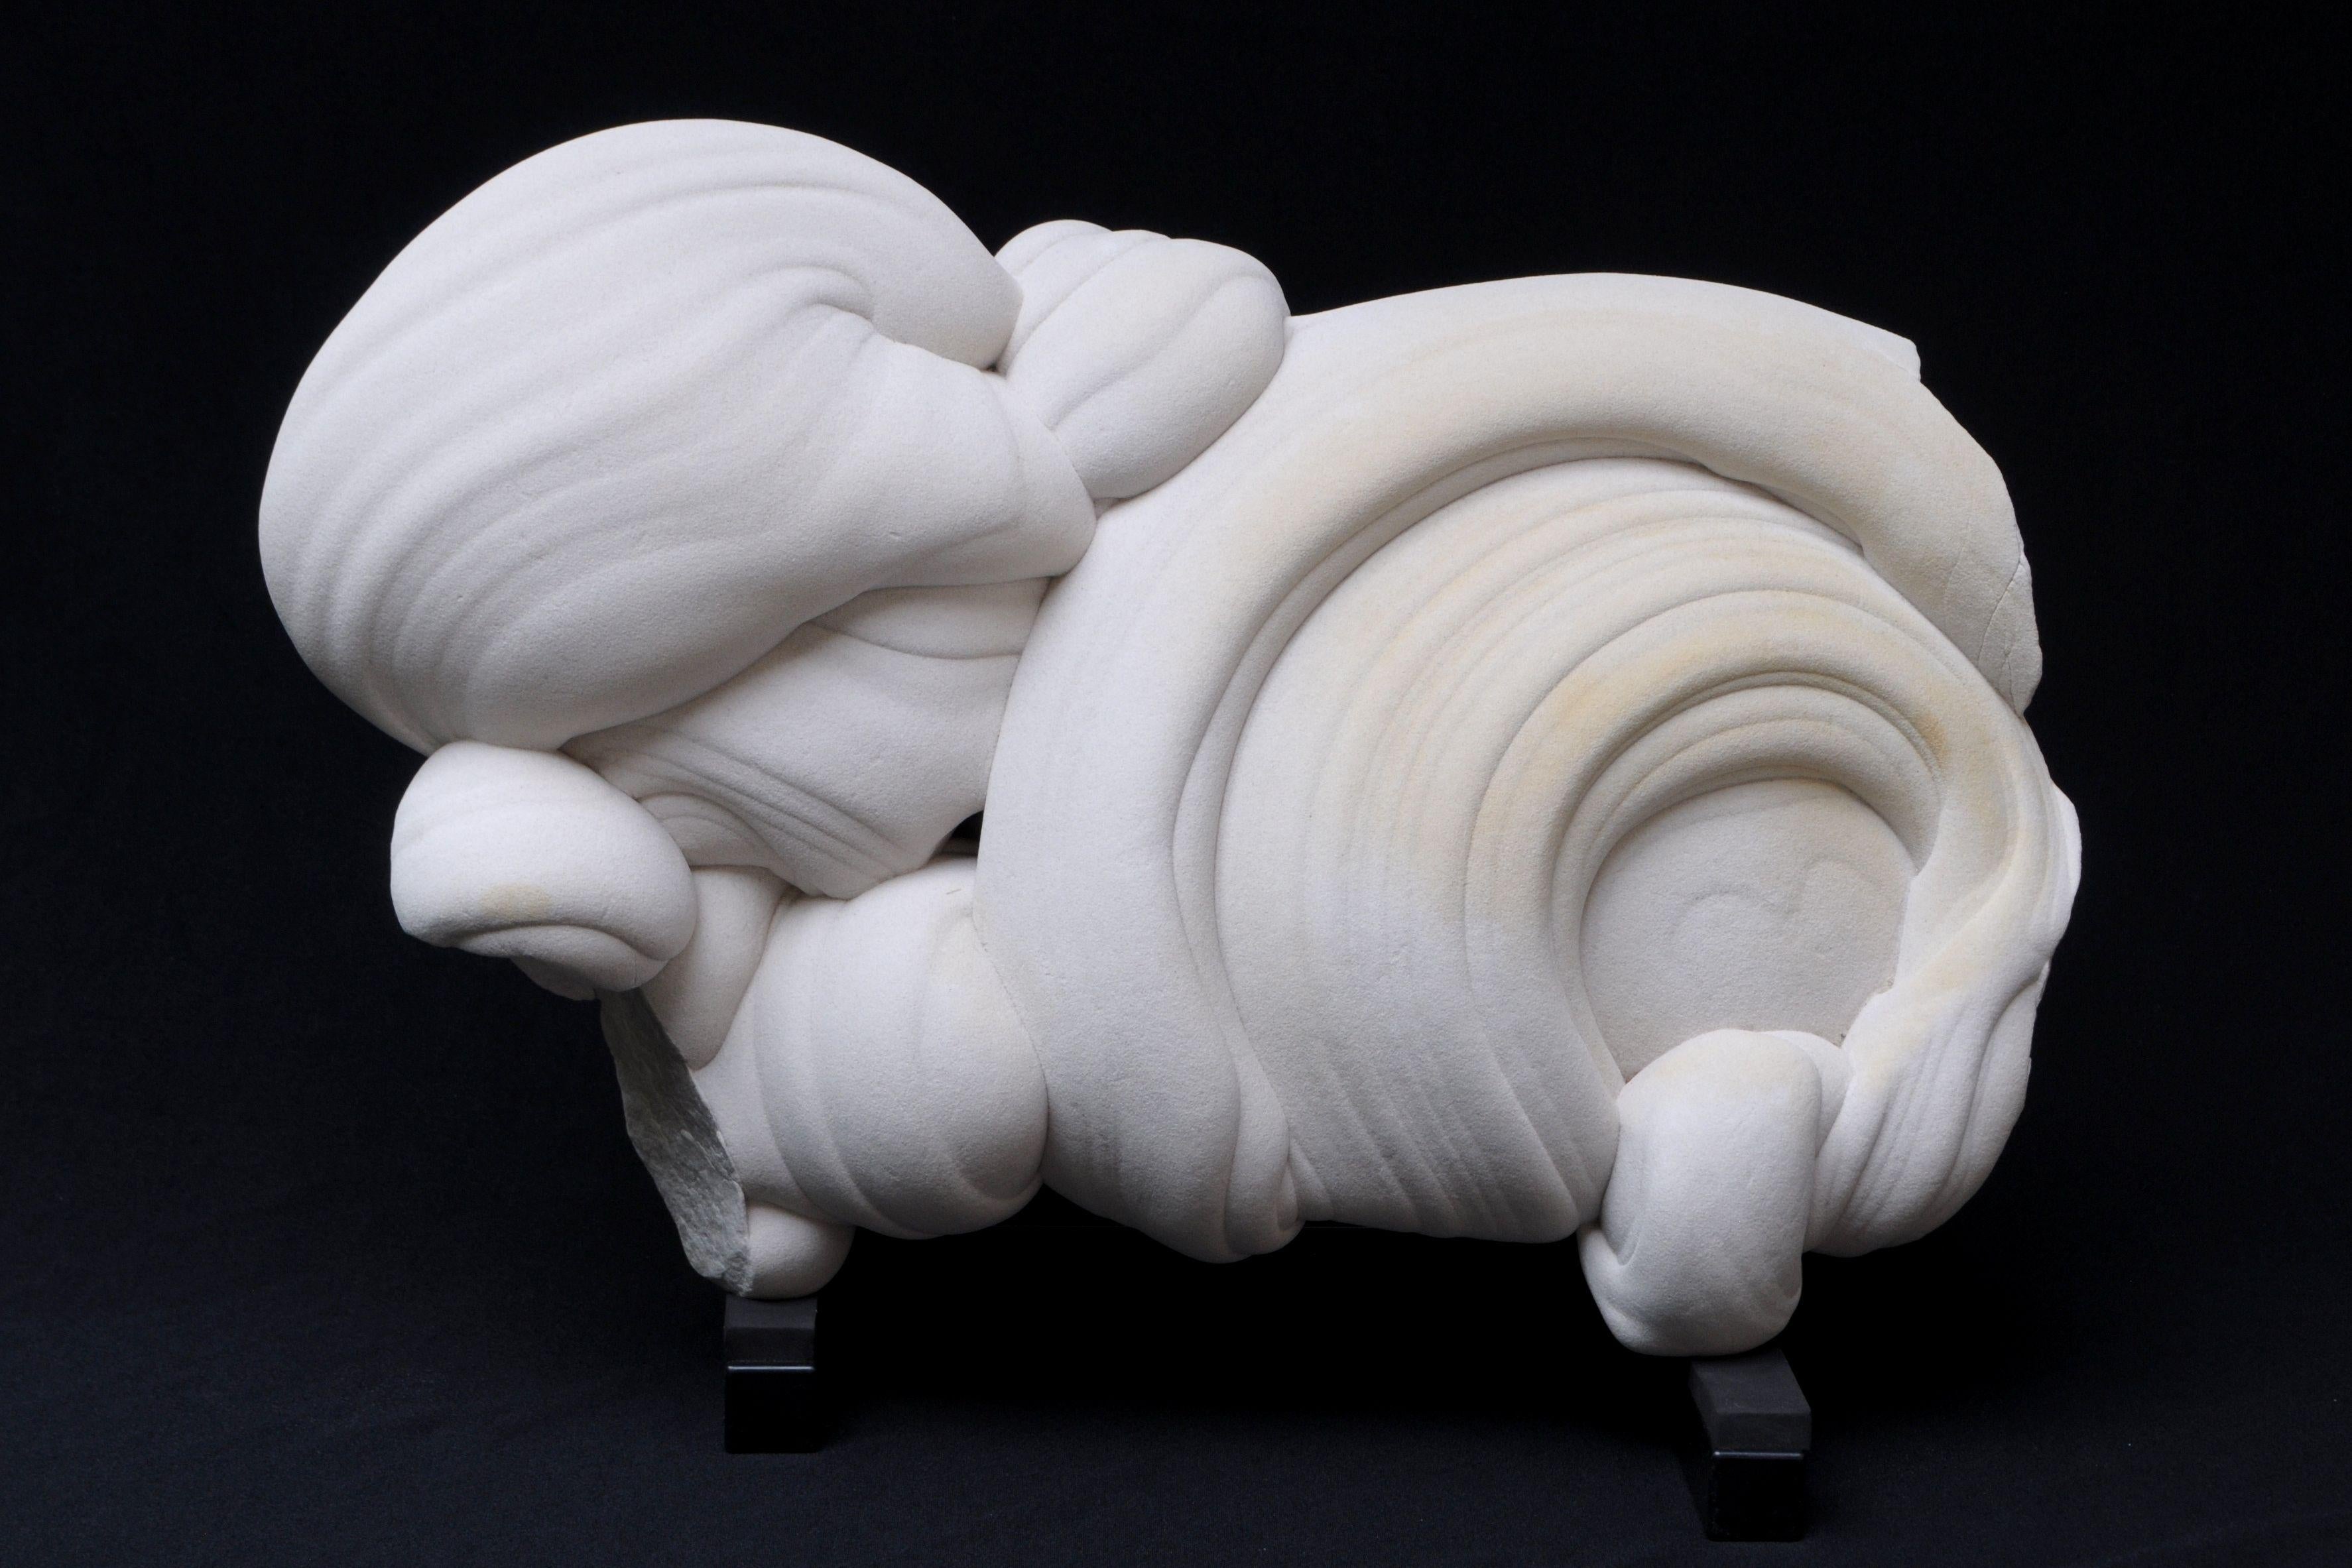 Gogotte Formation (Natural Sandstone Concretion) Abstract Sculpture - Persistence